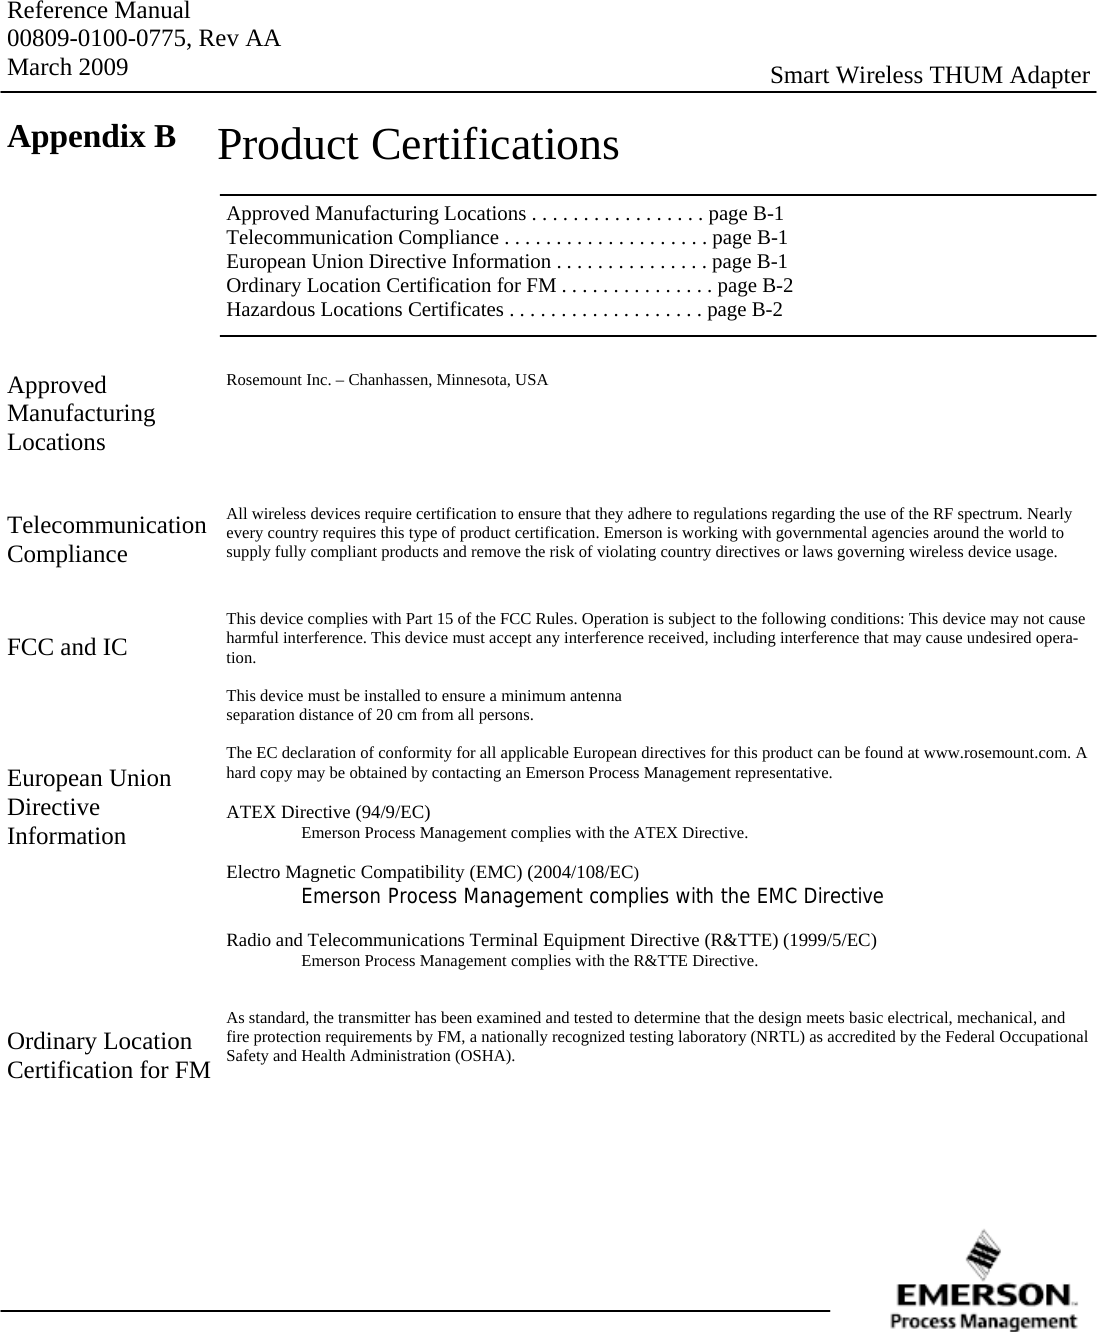 Reference Manual 00809-0100-0775, Rev AA March 2009  Smart Wireless THUM Adapter Appendix B  Product Certifications Approved Manufacturing Locations . . . . . . . . . . . . . . . . . page B-1 Telecommunication Compliance . . . . . . . . . . . . . . . . . . . . page B-1 European Union Directive Information . . . . . . . . . . . . . . . page B-1 Ordinary Location Certification for FM . . . . . . . . . . . . . . . page B-2 Hazardous Locations Certificates . . . . . . . . . . . . . . . . . . . page B-2 Approved  Manufacturing Locations Rosemount Inc. – Chanhassen, Minnesota, USA       All wireless devices require certification to ensure that they adhere to regulations regarding the use of the RF spectrum. Nearly every country requires this type of product certification. Emerson is working with governmental agencies around the world to supply fully compliant products and remove the risk of violating country directives or laws governing wireless device usage.   This device complies with Part 15 of the FCC Rules. Operation is subject to the following conditions: This device may not cause harmful interference. This device must accept any interference received, including interference that may cause undesired opera-tion.  This device must be installed to ensure a minimum antenna separation distance of 20 cm from all persons.  The EC declaration of conformity for all applicable European directives for this product can be found at www.rosemount.com. A hard copy may be obtained by contacting an Emerson Process Management representative.  ATEX Directive (94/9/EC)   Emerson Process Management complies with the ATEX Directive.  Electro Magnetic Compatibility (EMC) (2004/108/EC)  Emerson Process Management complies with the EMC Directive  Radio and Telecommunications Terminal Equipment Directive (R&amp;TTE) (1999/5/EC)   Emerson Process Management complies with the R&amp;TTE Directive.   As standard, the transmitter has been examined and tested to determine that the design meets basic electrical, mechanical, and fire protection requirements by FM, a nationally recognized testing laboratory (NRTL) as accredited by the Federal Occupational Safety and Health Administration (OSHA). Telecommunication Compliance FCC and IC European Union Directive  Information Ordinary Location Certification for FM 